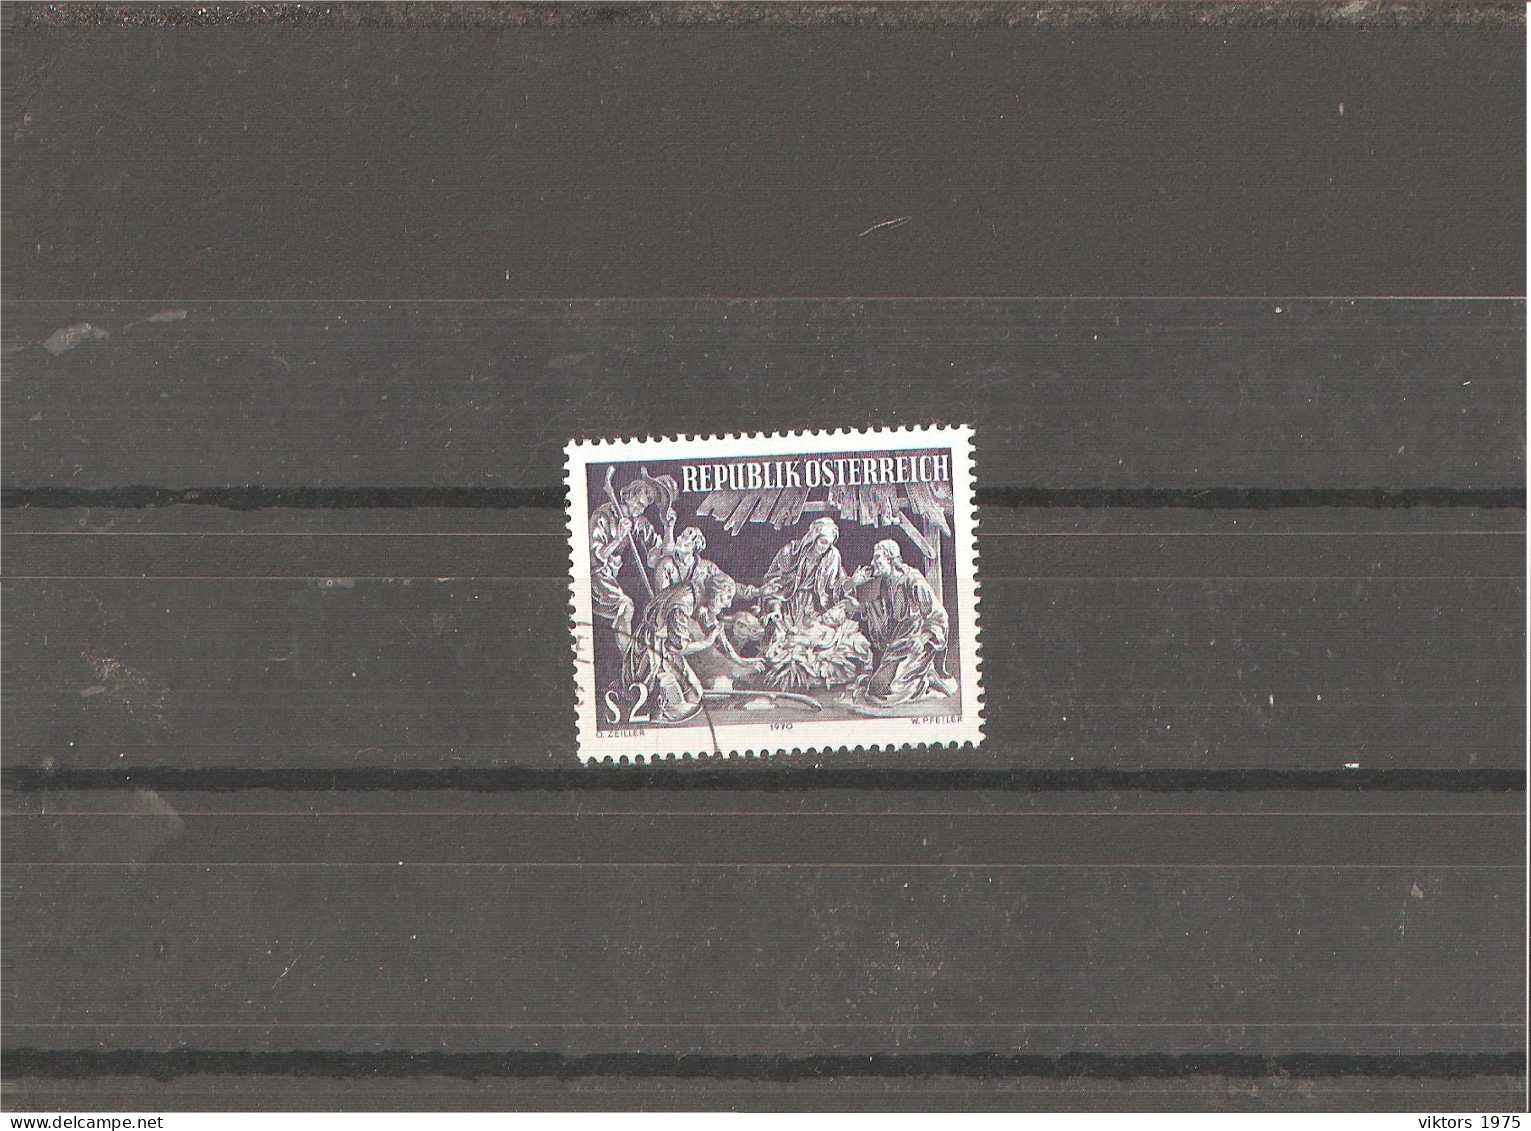 Used Stamp Nr.1349 In MICHEL Catalog - Used Stamps